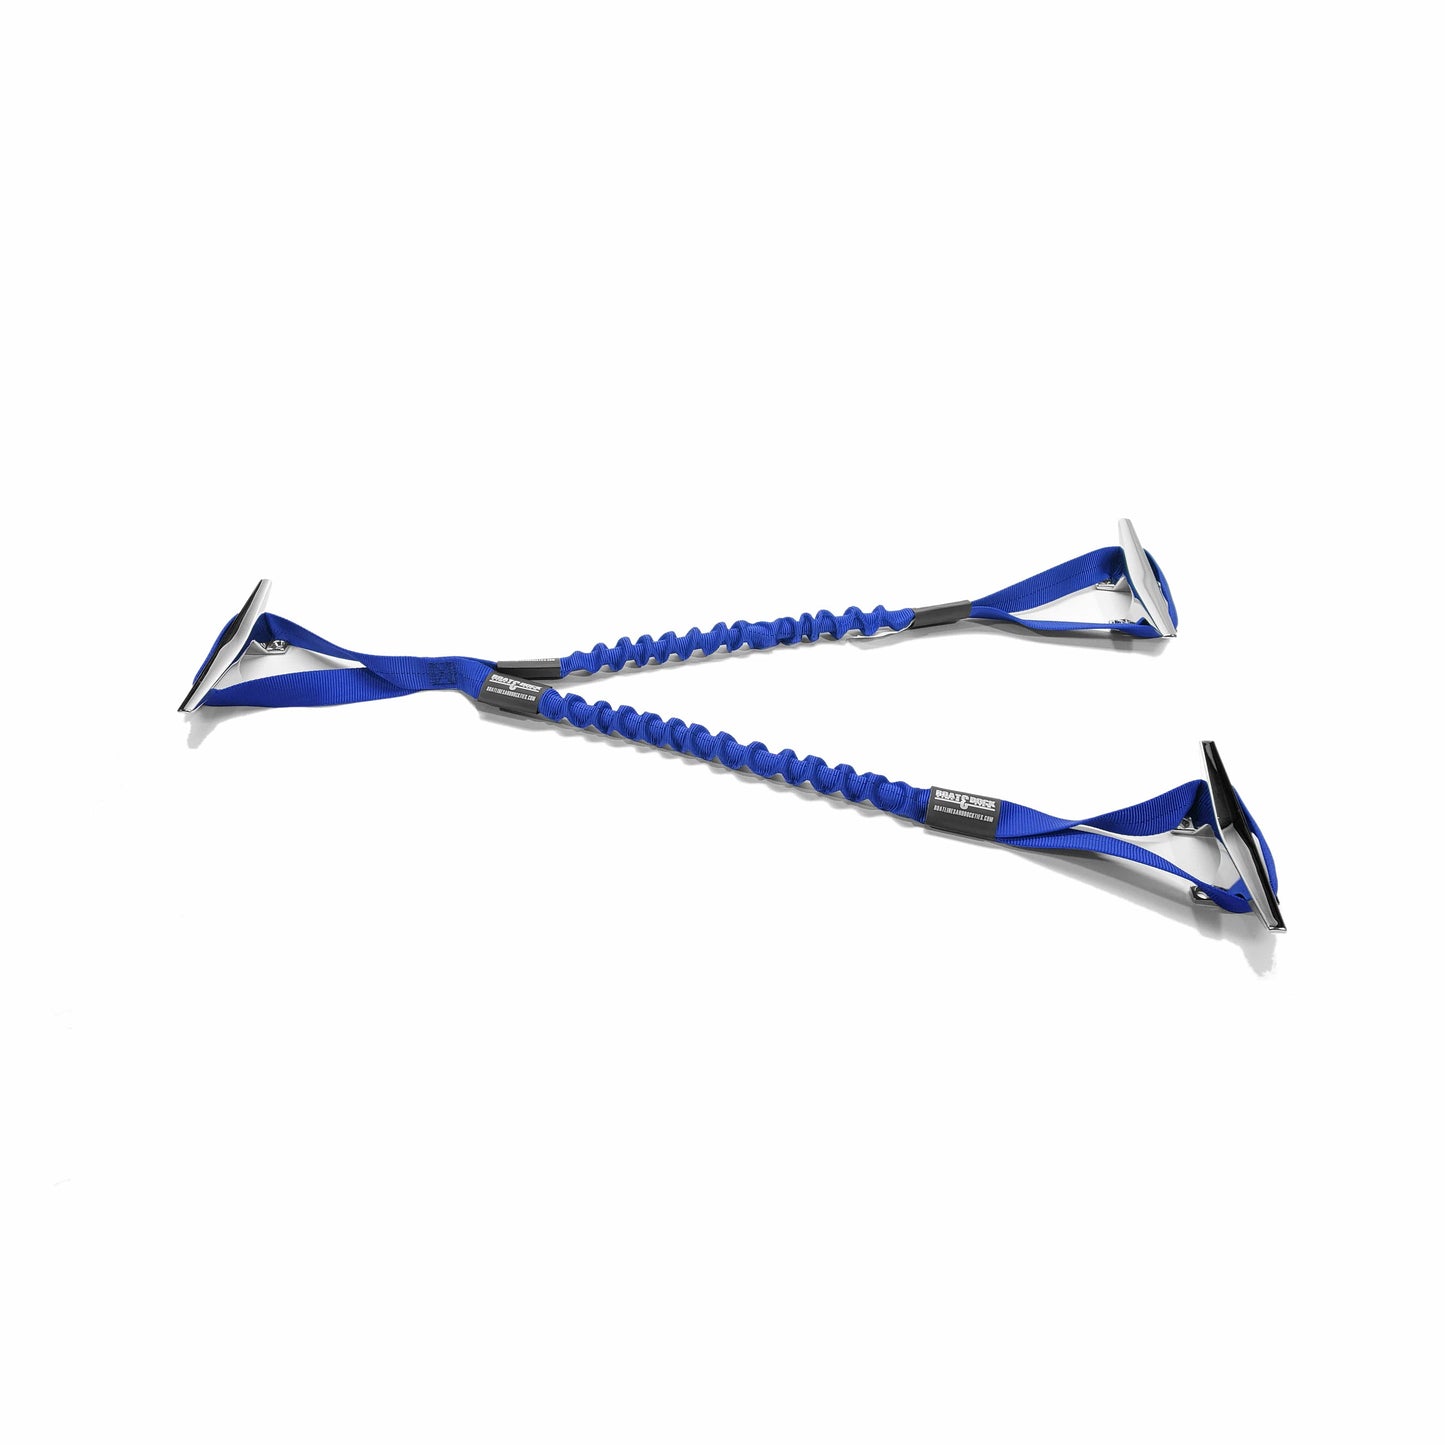 Wake Defender -3 Point Dock Attachment System - 3 Loop Ends - Boat Lines & Dock Ties Boat Lines & Dock Ties 24 Inch / Blue